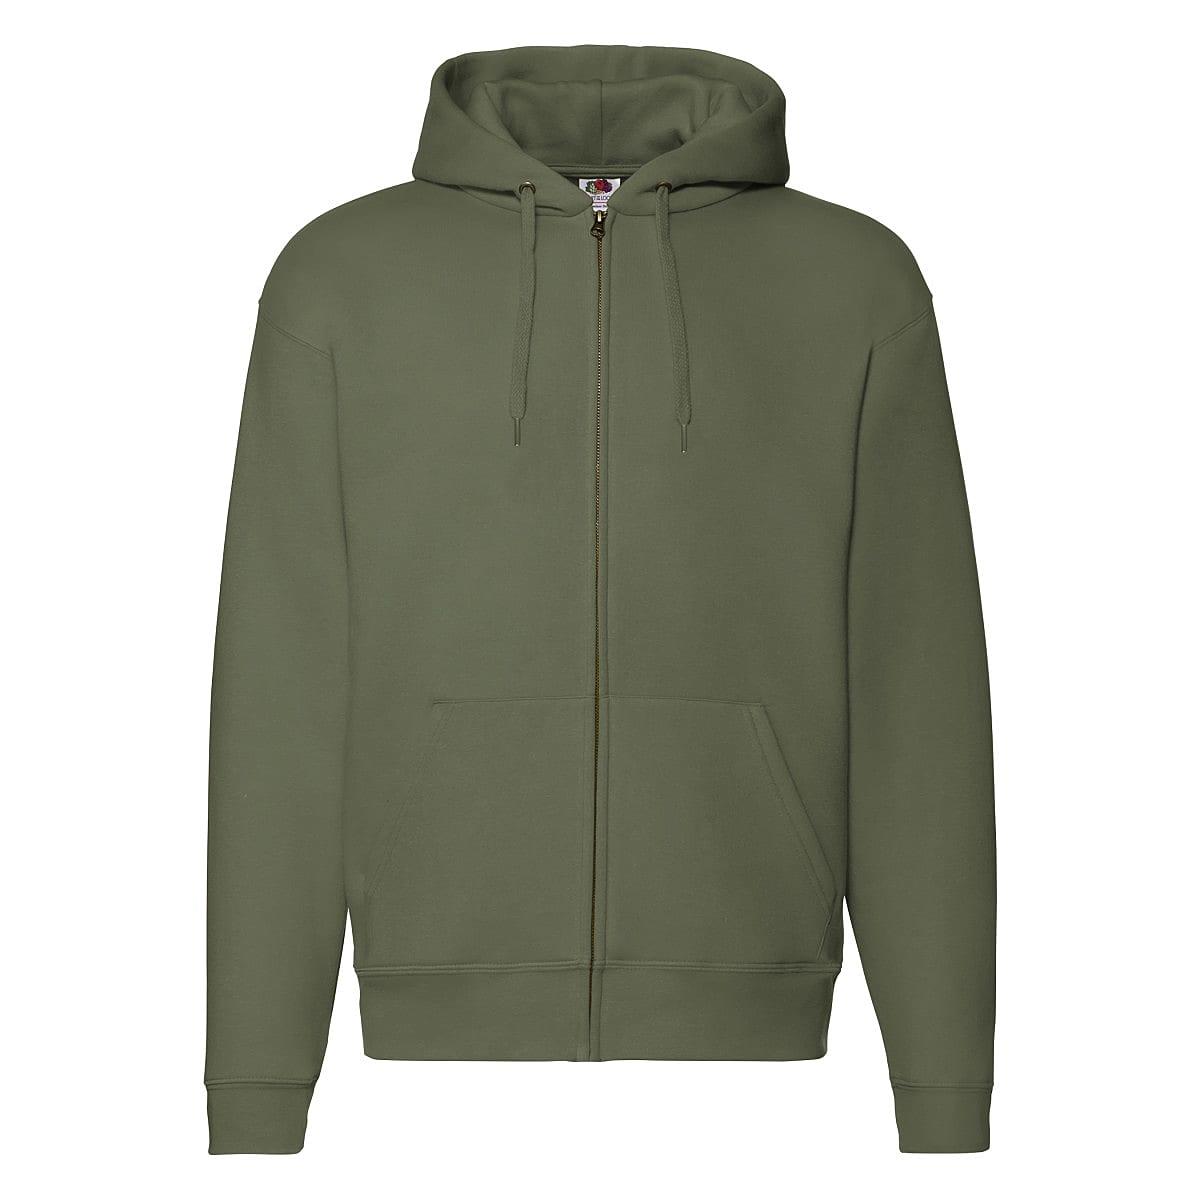 Fruit Of The Loom Zip Through Hoodie in Classic Olive (Product Code: 62034)